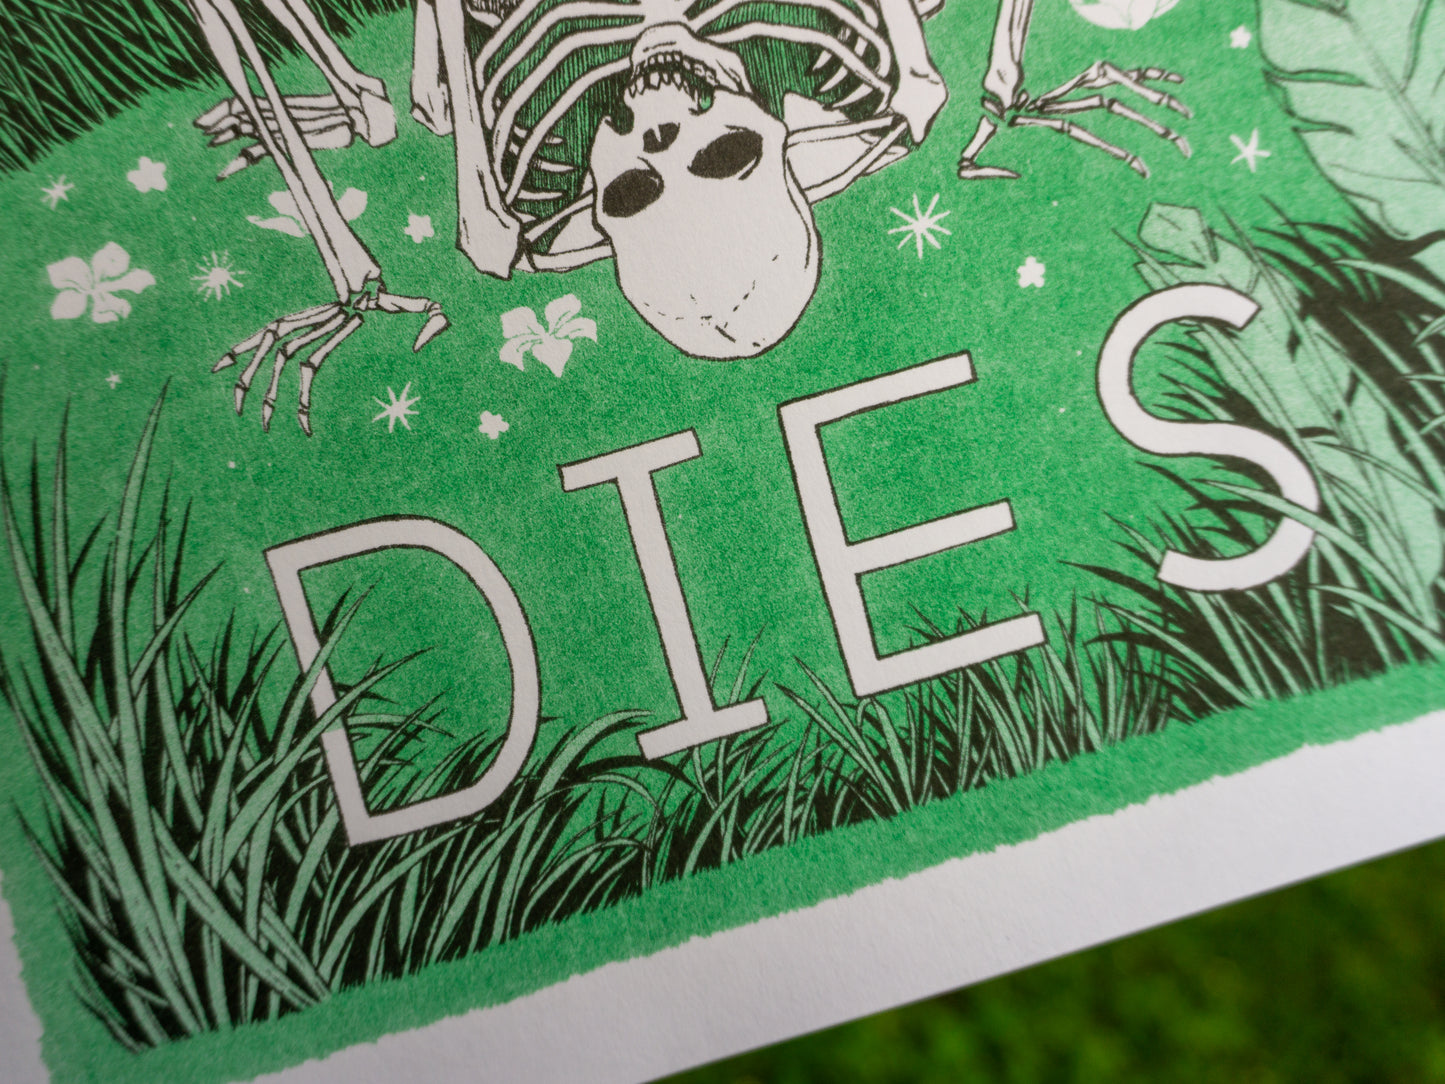 Close up of the word DIES from the Love Never Dies riso poster. Green and black inks show grass around the letters, and a skeleton in the background.